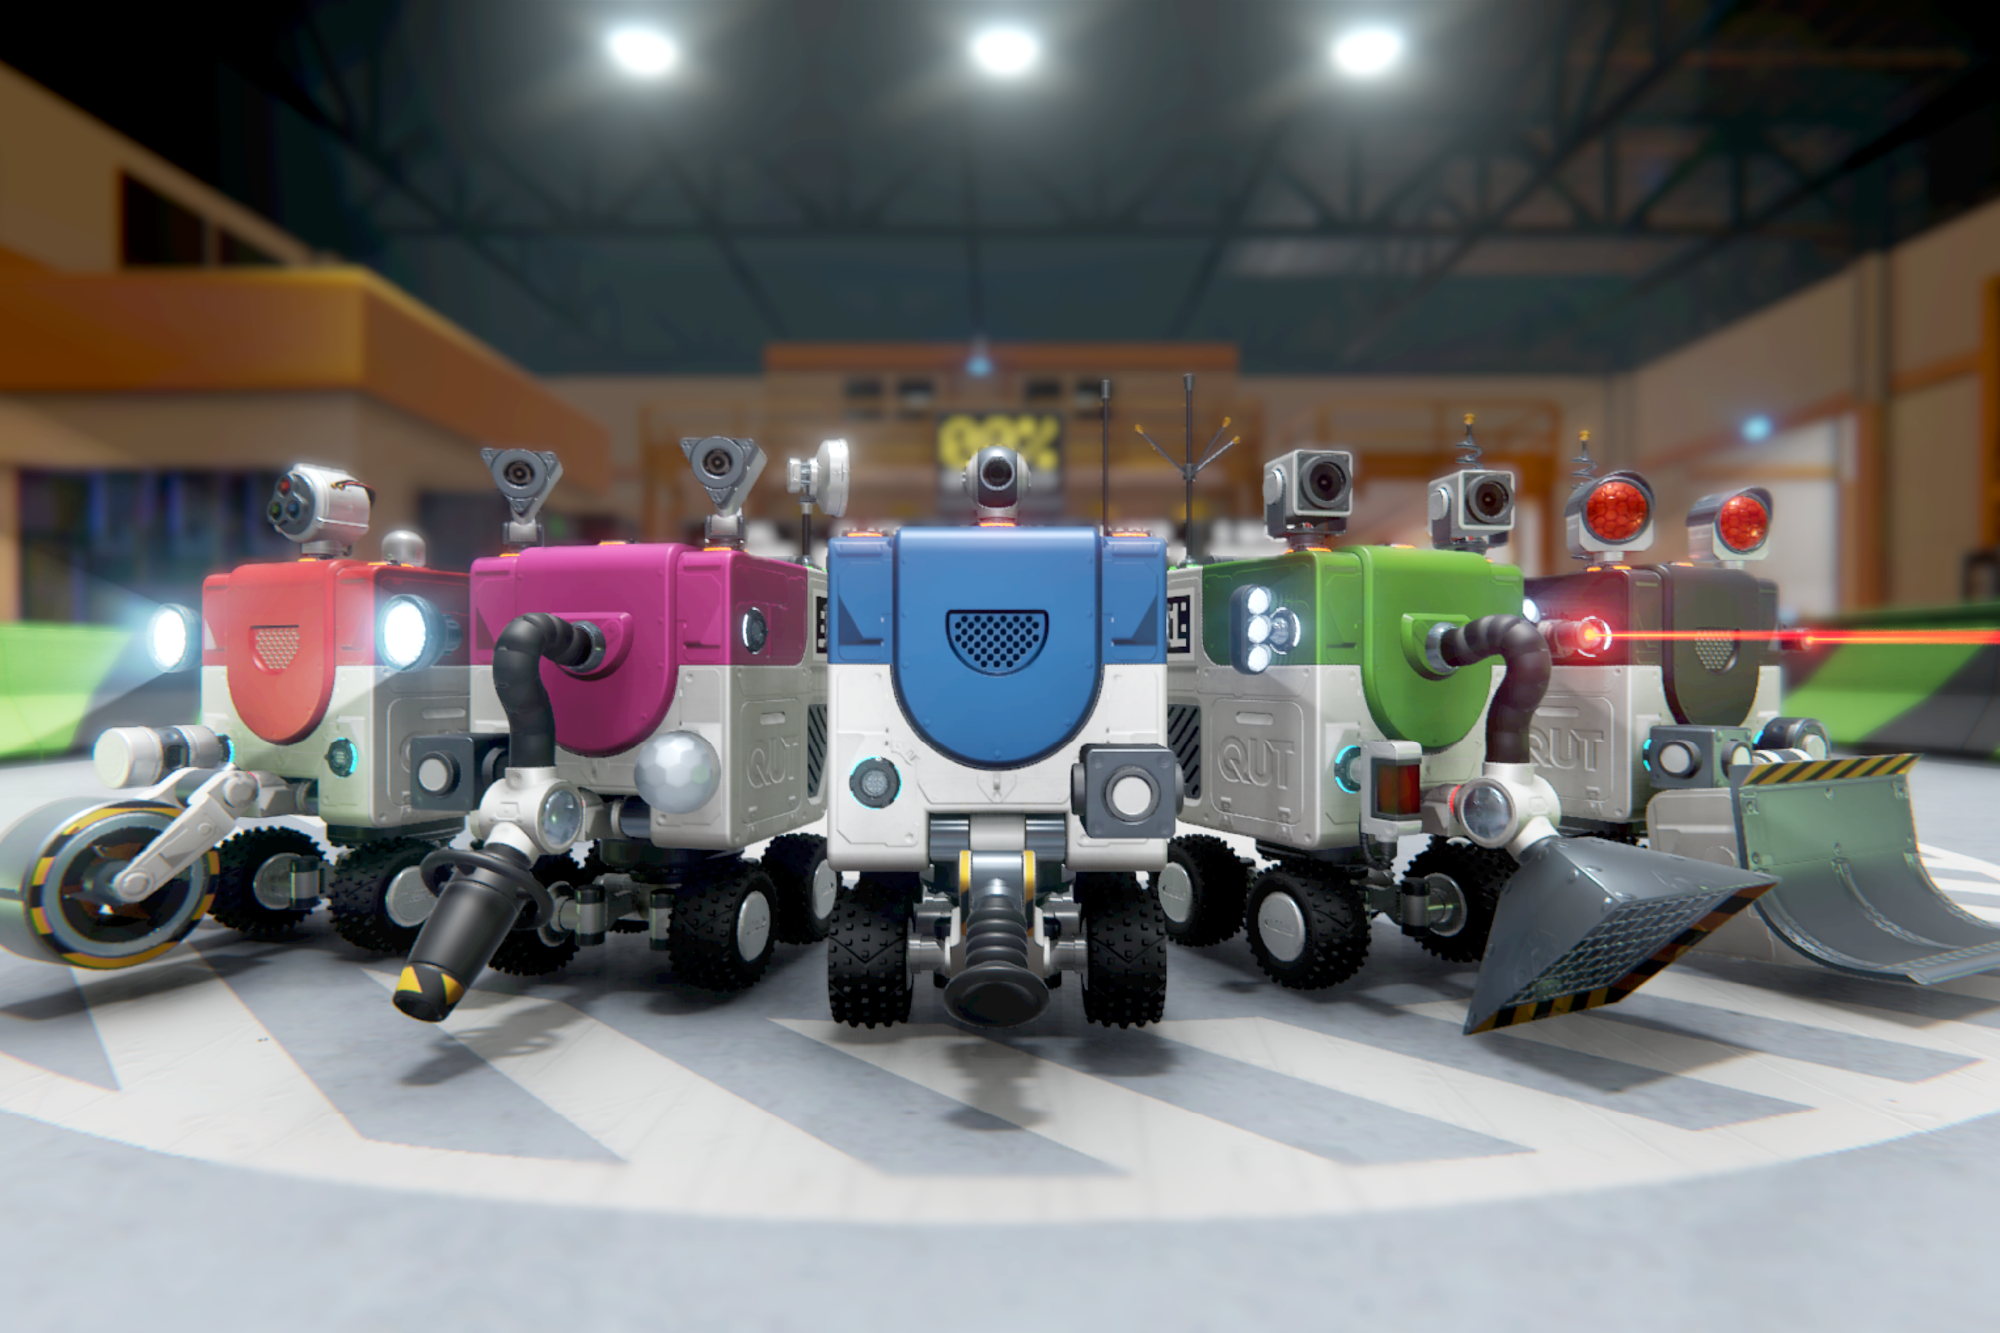 An animated still of five robots sitting in a row.